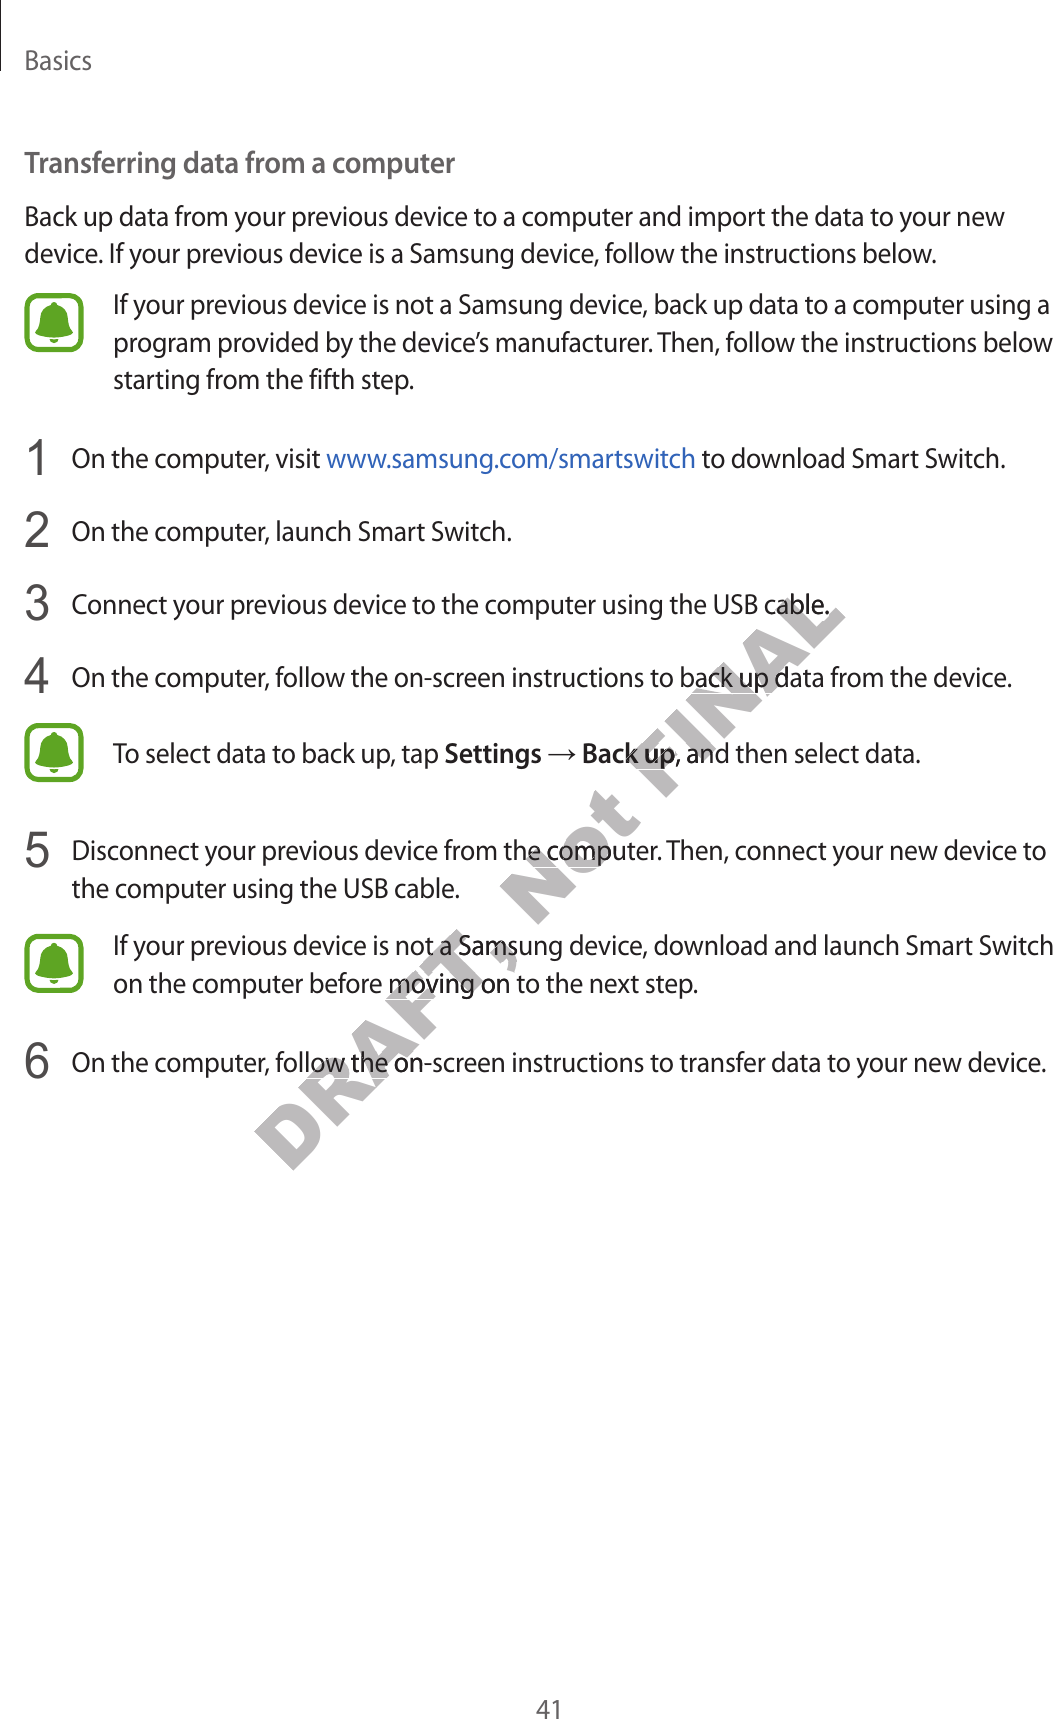 Basics41Transferring data from a computerBack up data from your previous device to a computer and import the data to your new device. If your previous device is a Samsung device, follow the instructions below.If your previous device is not a Samsung device, back up data to a computer using a program provided by the device’s manufacturer. Then, follow the instructions below starting from the fifth step. On the computer, visit www.samsung.com/smartswitch to download Smart Switch. On the computer, launch Smart Switch. Connect your previous device to the computer using the USB cable. On the computer, follow the on-screen instructions to back up data from the device.To select data to back up, tap Settings  Back up, and then select data.5 Disconnect your previous device from the computer. Then, connect your new device to the computer using the USB cable.If your previous device is not a Samsung device, download and launch Smart Switch on the computer before moving on to the next step. On the computer, follow the on-screen instructions to transfer data to your new device.DRAFT, e is not a Samsung device is not a Samsung devicore moving on tore moving on t, follow the on-scr, follow the on-scrNot om the computom the computFINALer using the USB cable.er using the USB cable.o back up dao back up daack upack up, and then selec, and then selec